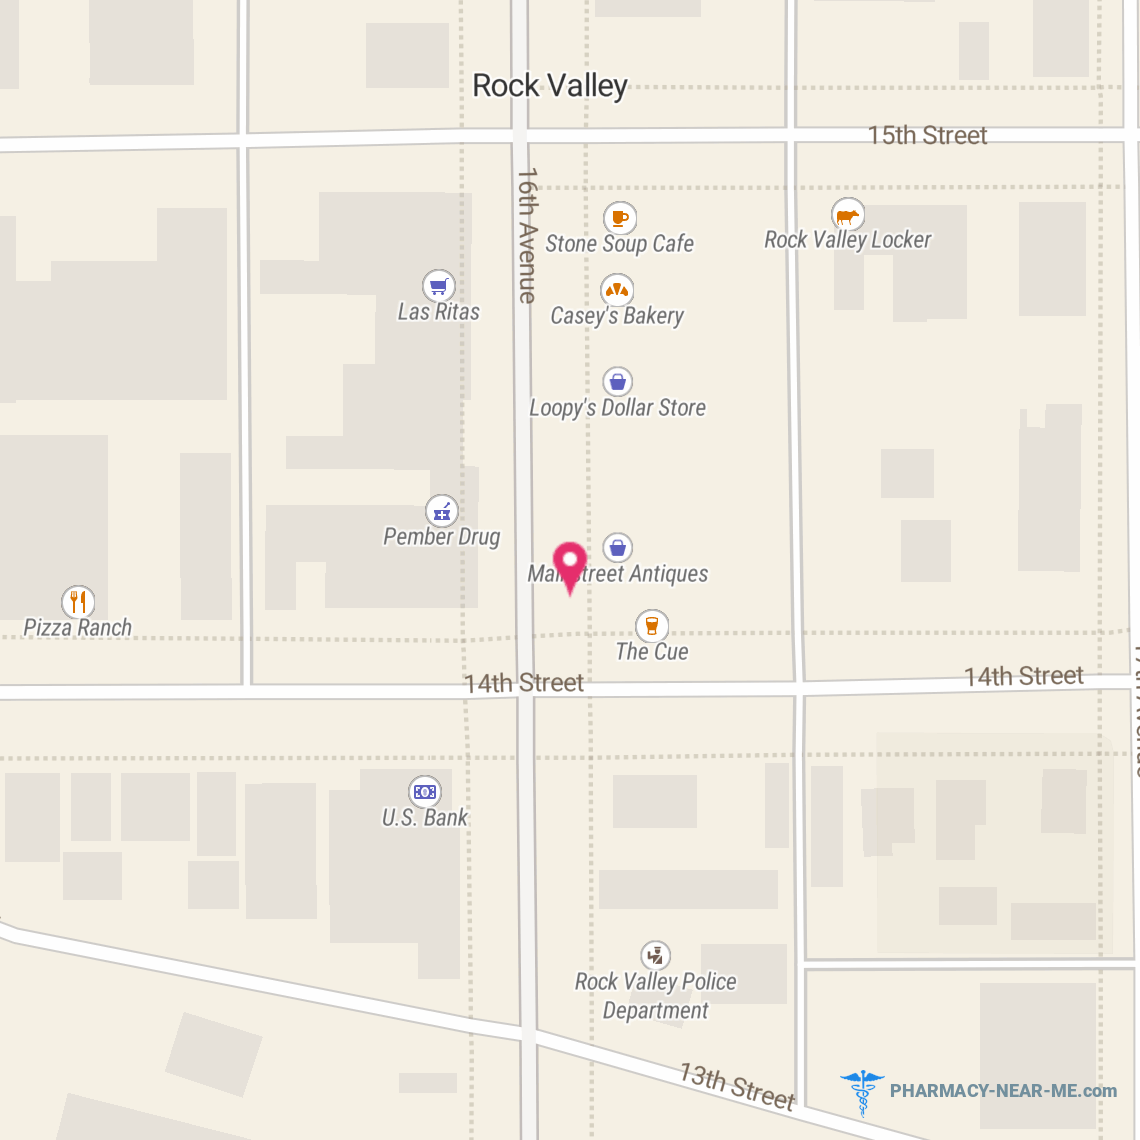 VALLEY PHARMACY - Pharmacy Hours, Phone, Reviews & Information: 1418 Main St, Rock Valley, Iowa 51247, United States